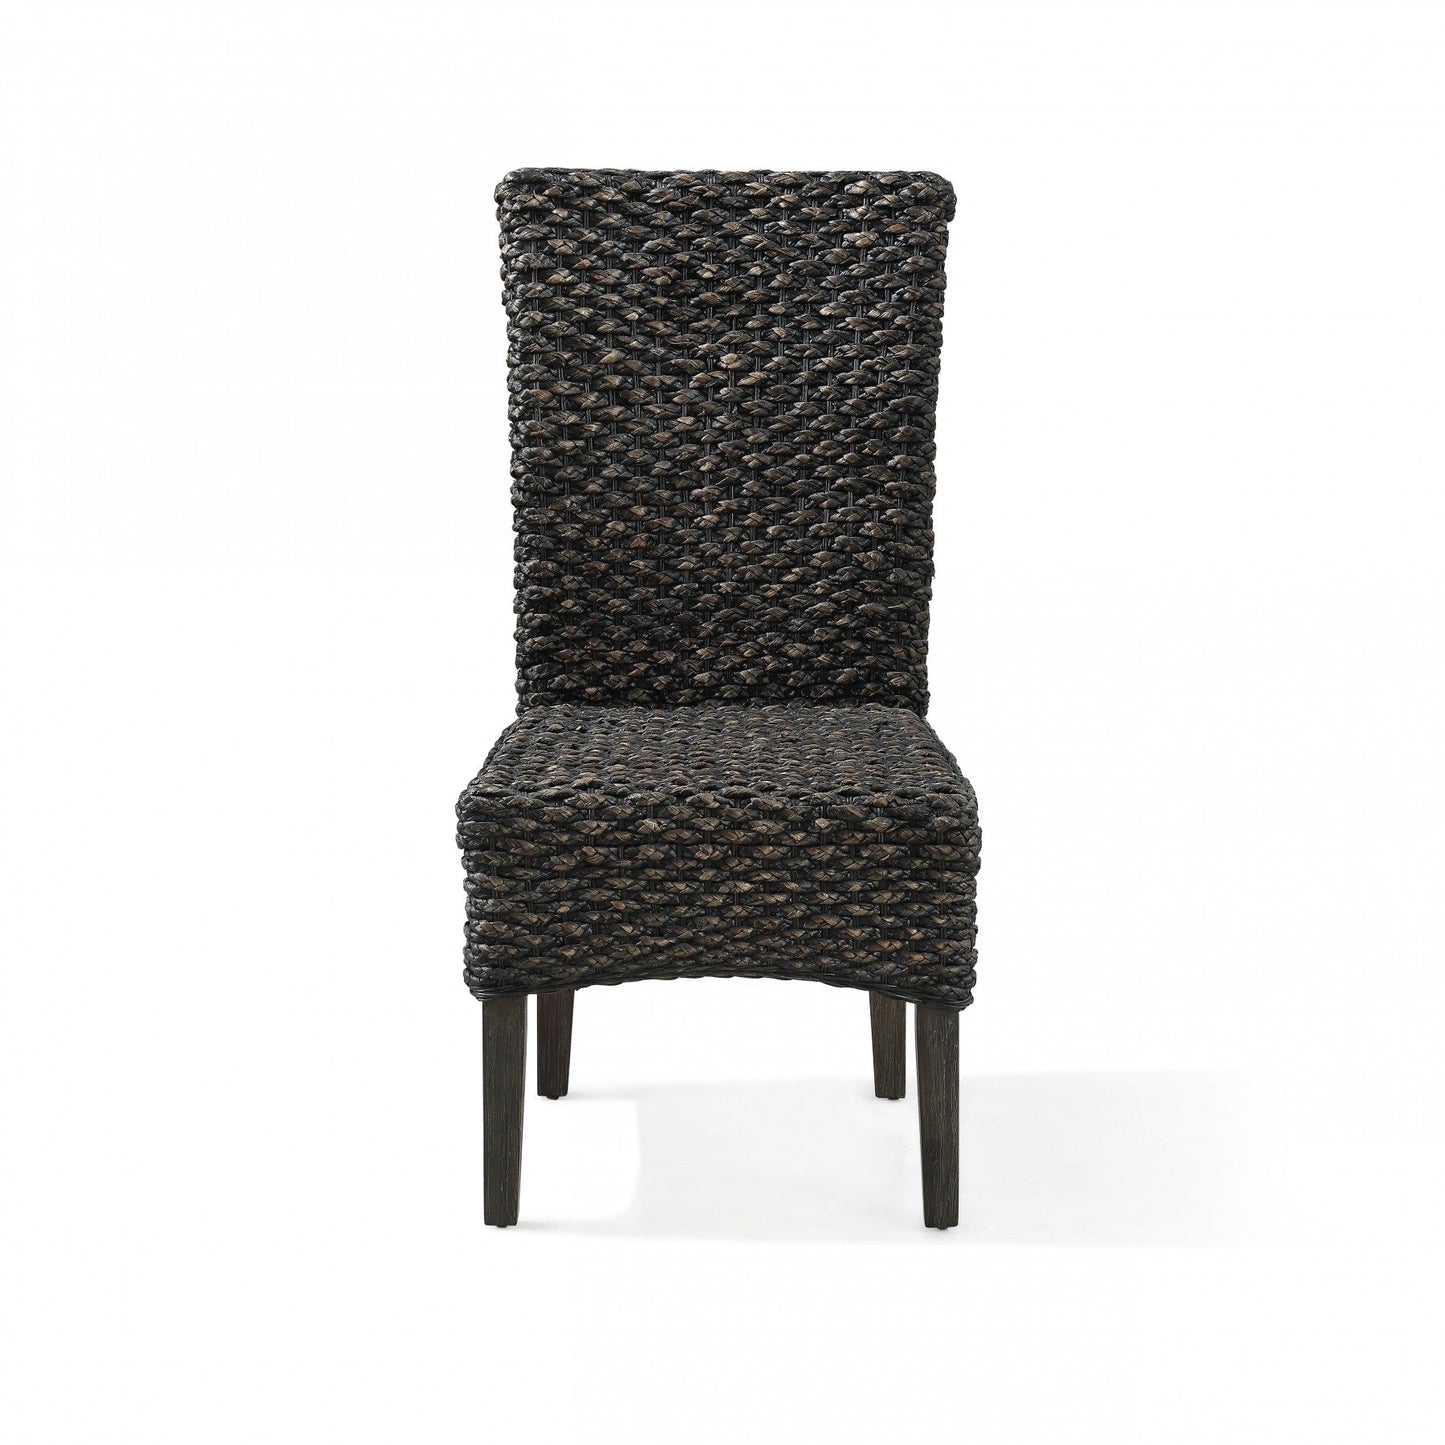 Modus Meadow 2 Chair Water Hyacinth in Graphite